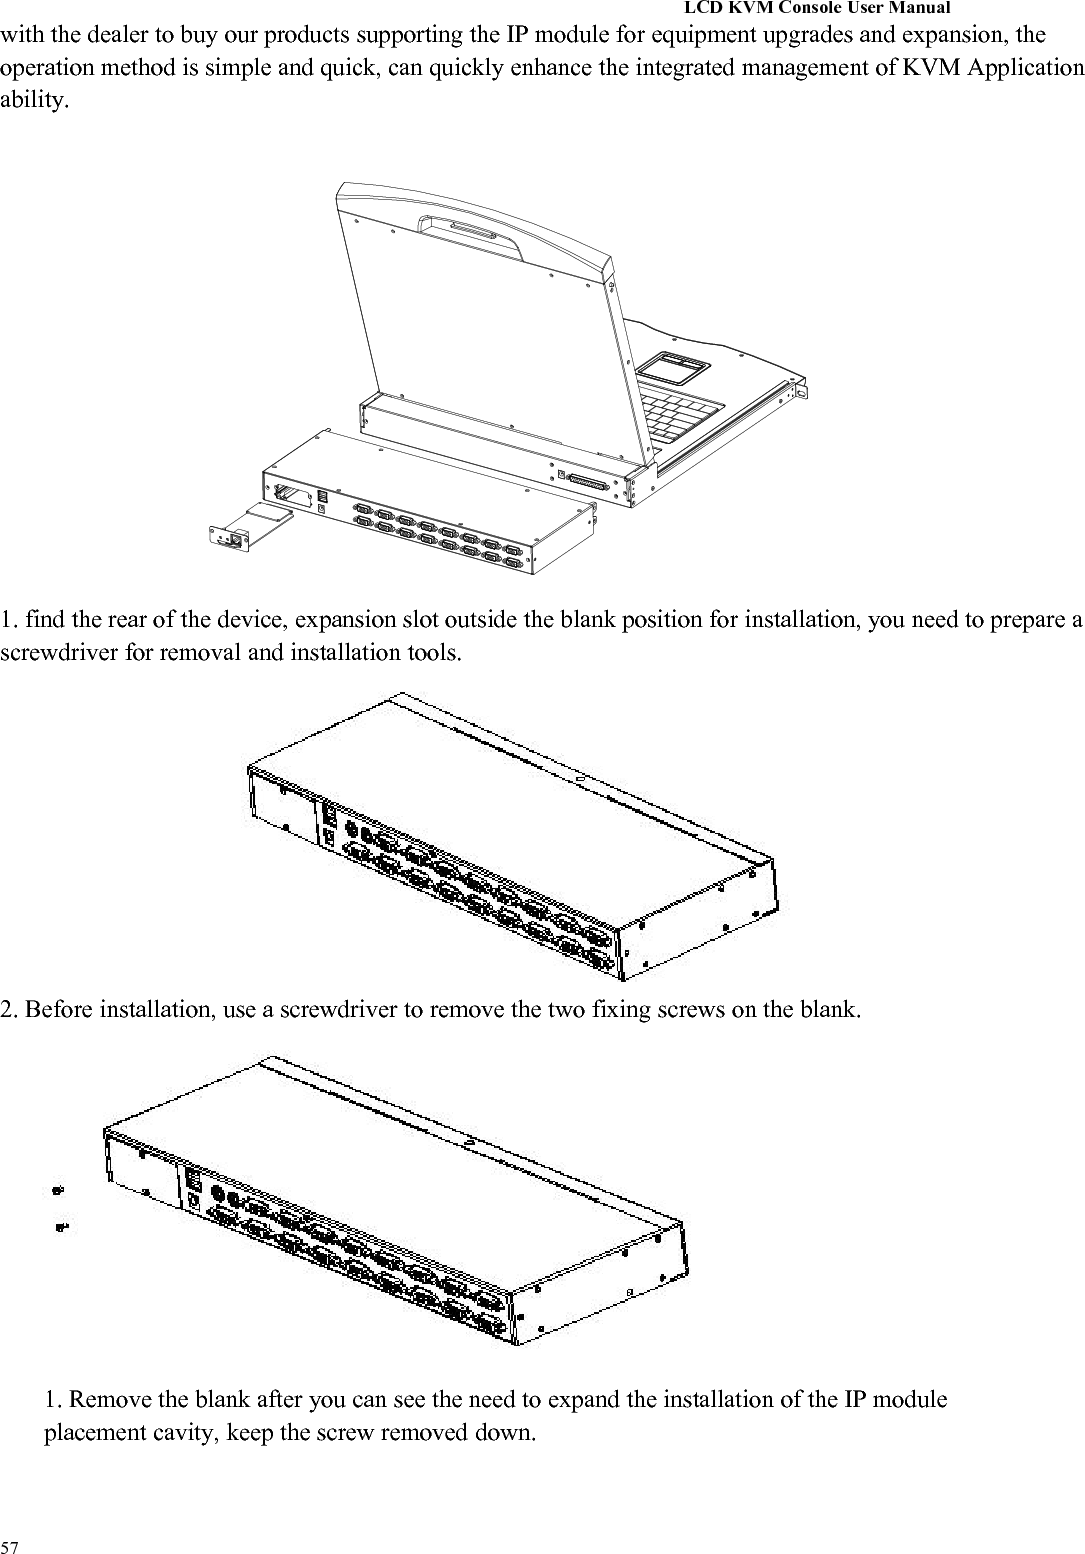 LCD KVM Console User Manual57with the dealer to buy our products supporting the IP module for equipment upgrades and expansion, theoperation method is simple and quick, can quickly enhance the integrated management of KVM Applicationability.1. find the rear of the device, expansion slot outside the blank position for installation, you need to prepare ascrewdriver for removal and installation tools.2. Before installation, use a screwdriver to remove the two fixing screws on the blank.1. Remove the blank after you can see the need to expand the installation of the IP moduleplacement cavity, keep the screw removed down.